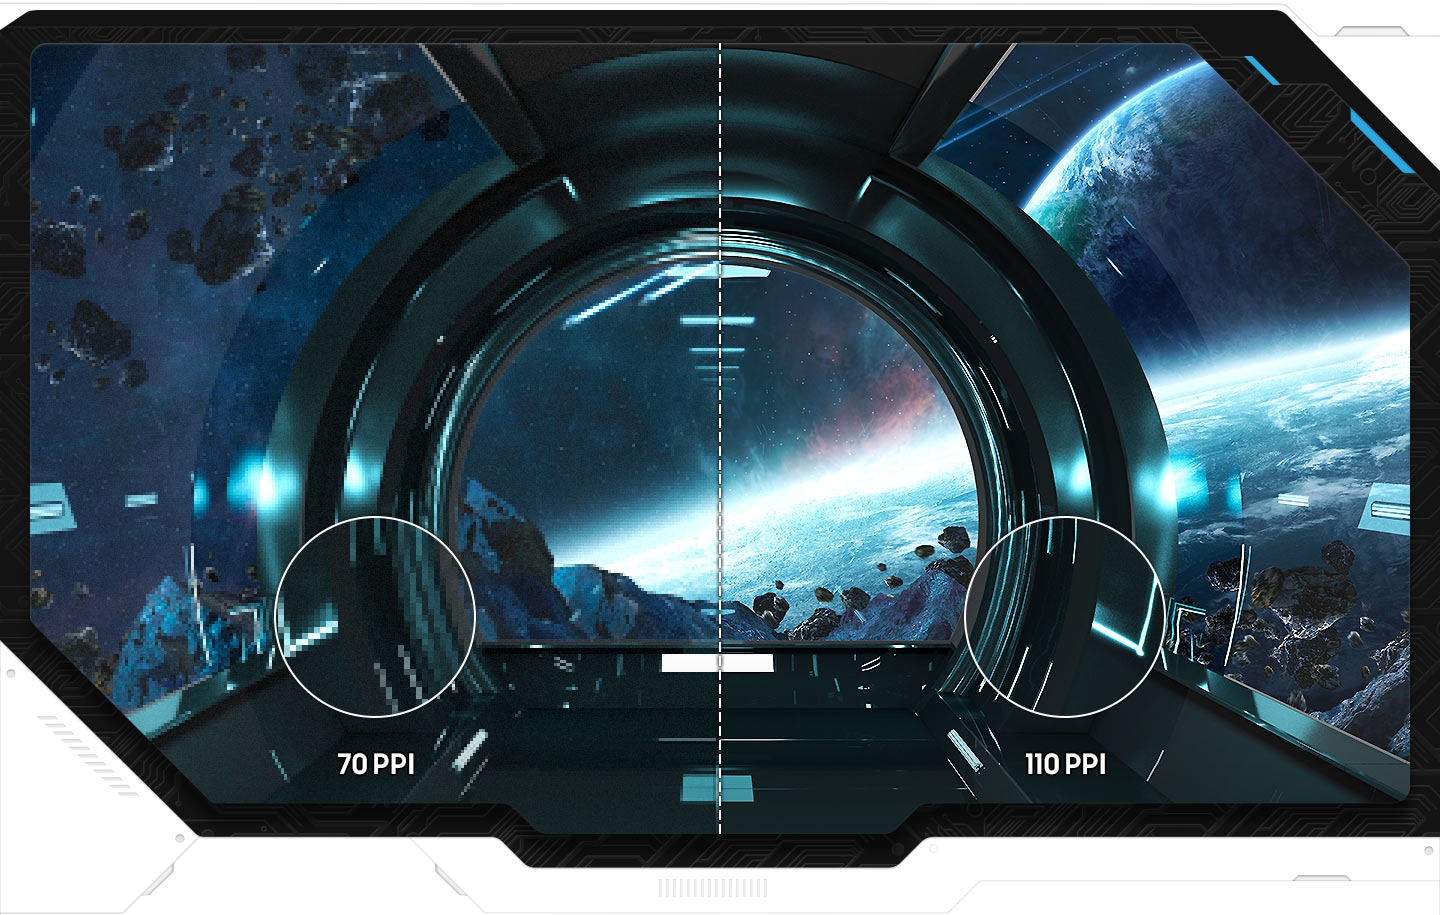 A single monitor is divided into two sections on its screen. Across both sections, a spaceship is flying through a group of asteroids, in orbit of a nearby planet, with one planet in the background. The left side of the screen is pixelated, with a circle zooming into a further pixelated section labeled "70 PPI." The right side of the screen is clearly rendered, with a circle zoomed into a crisp section of the image labeled "110 PPI."